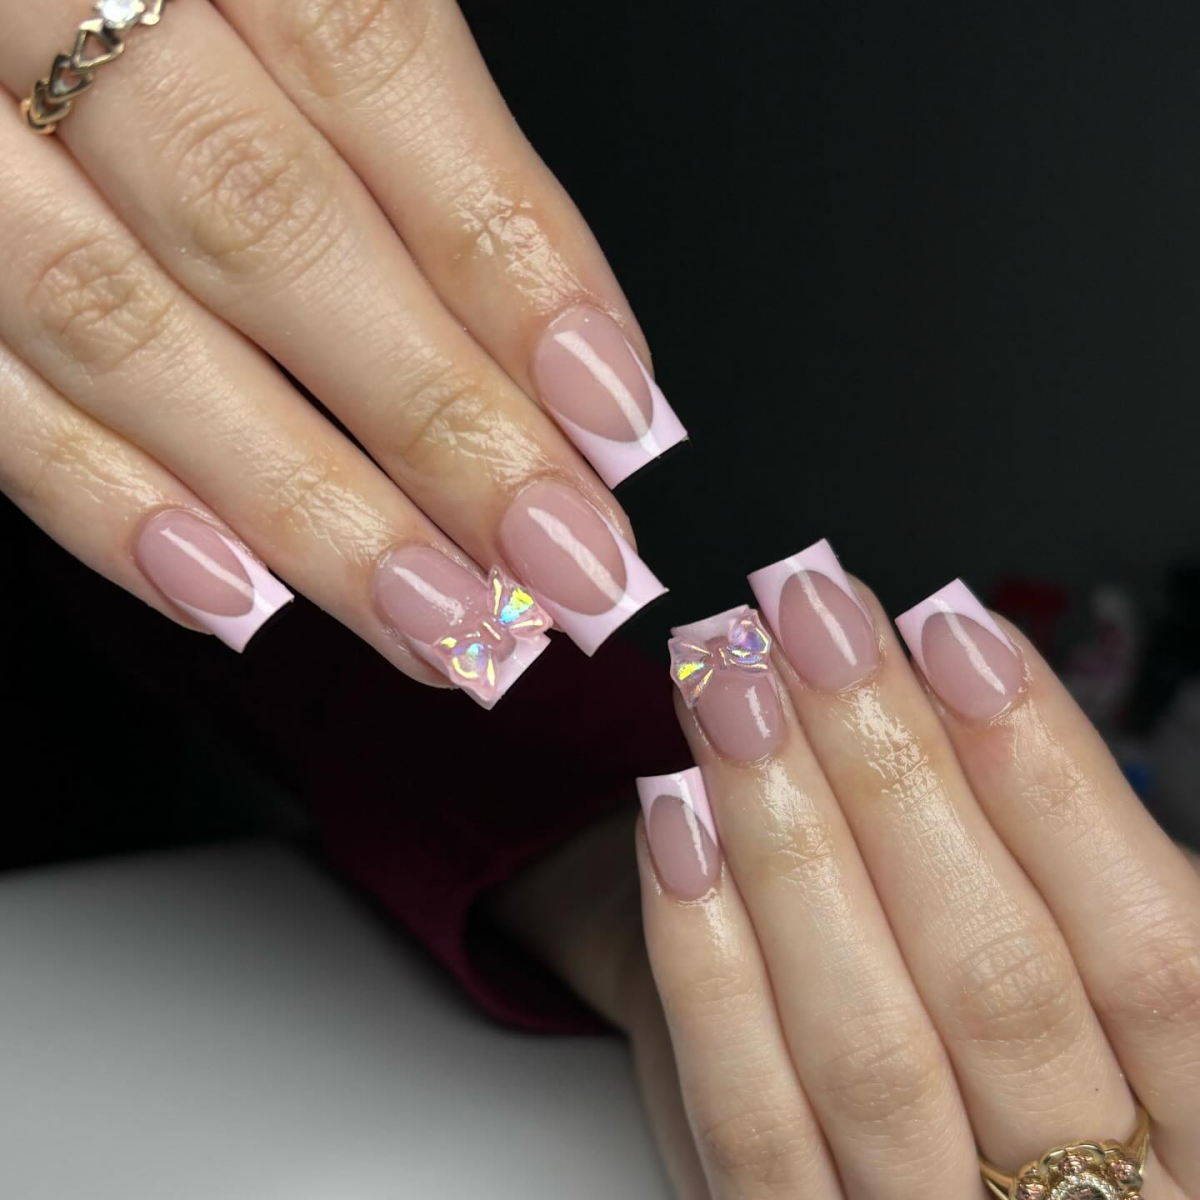 coquette aesthetic nails with bow